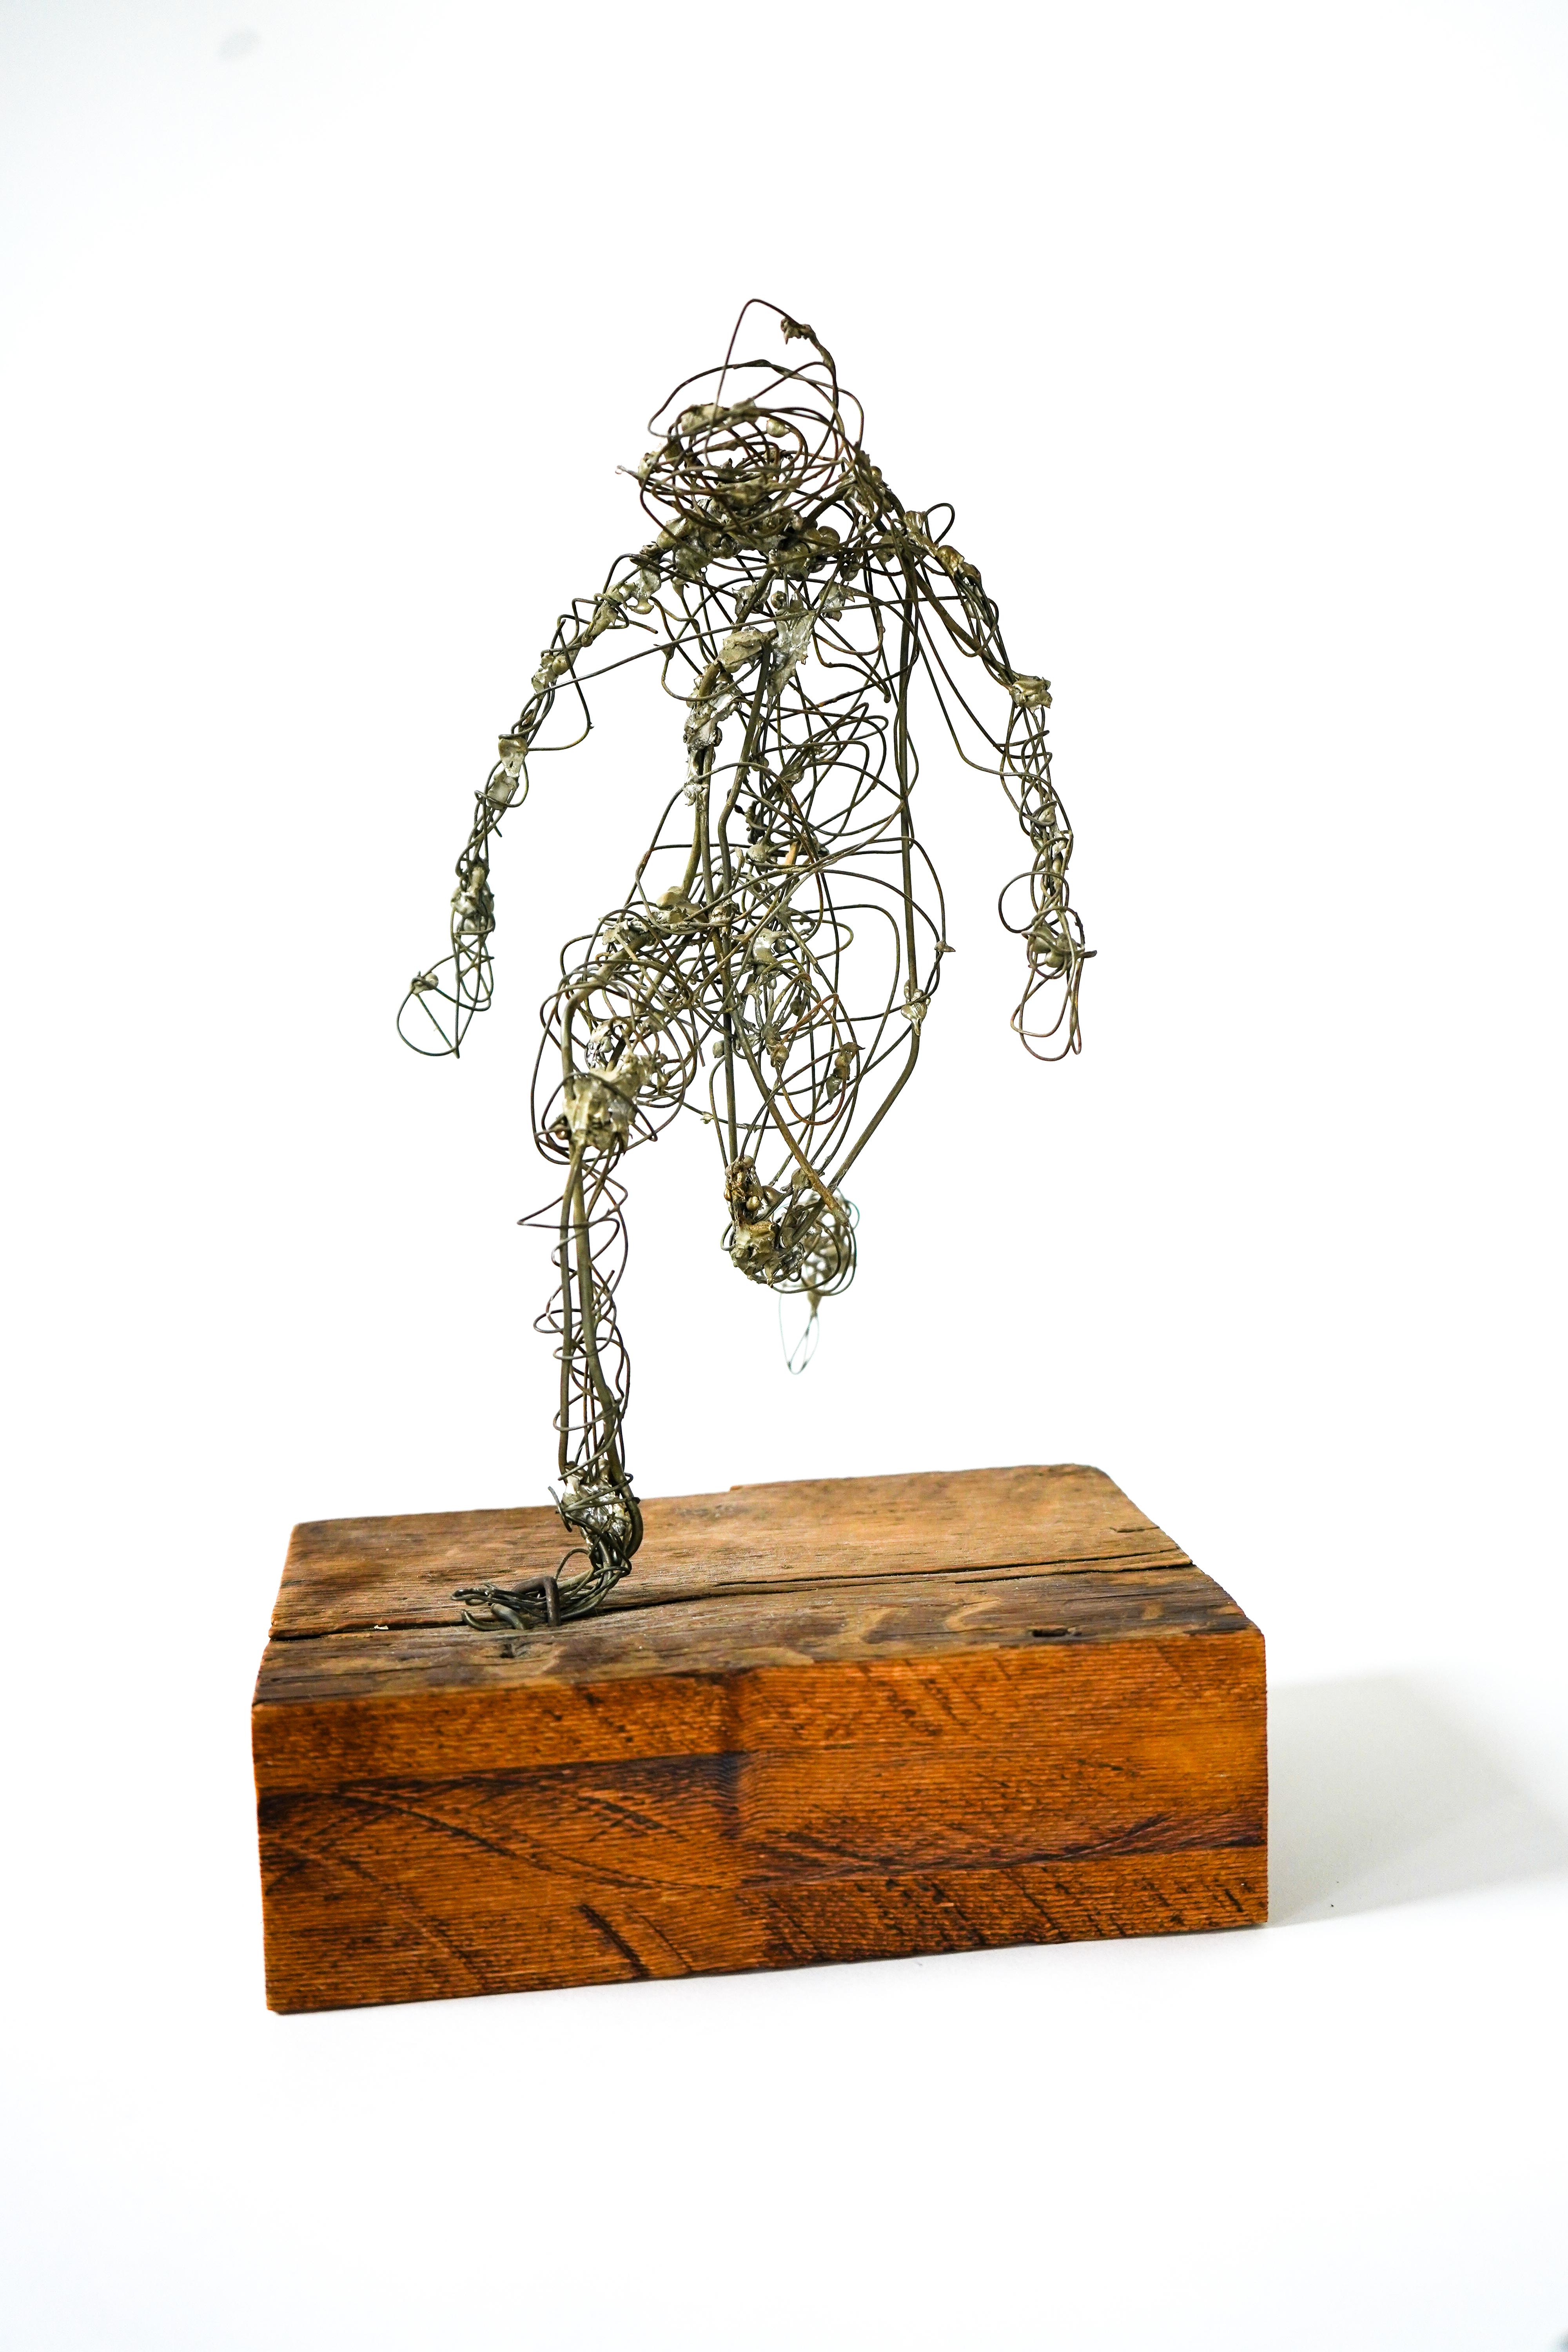 Frances Venardos Gialamas Abstract Wire Figure In Motion Sculpture 1950's. A wonderful work of sculptural art by noted artist Fran Gialamas. The form is crafted from wires and soldered to create an abstract human figure in motion.